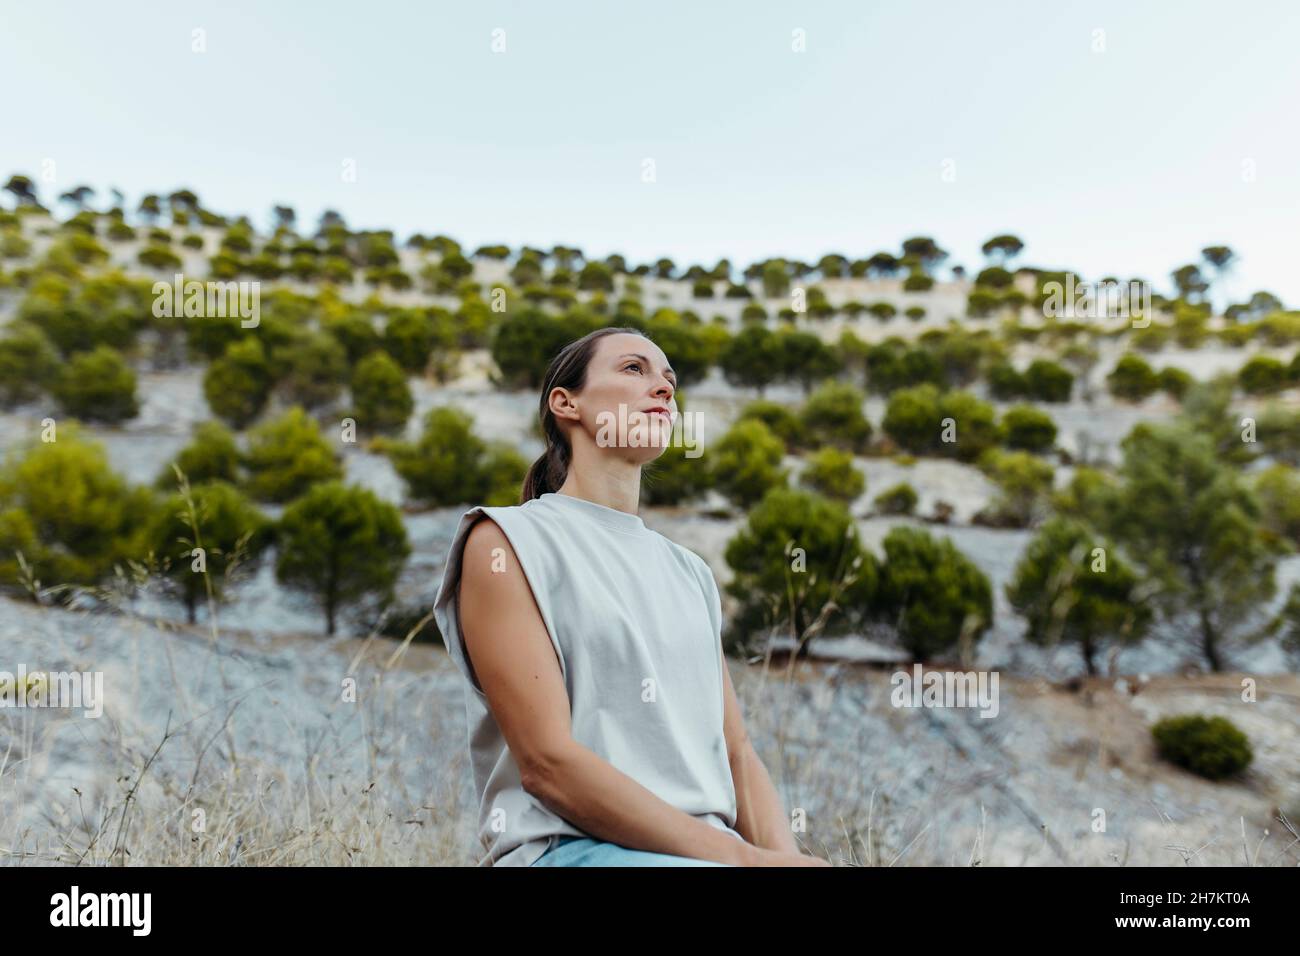 Woman contemplating while sitting at old mine Stock Photo